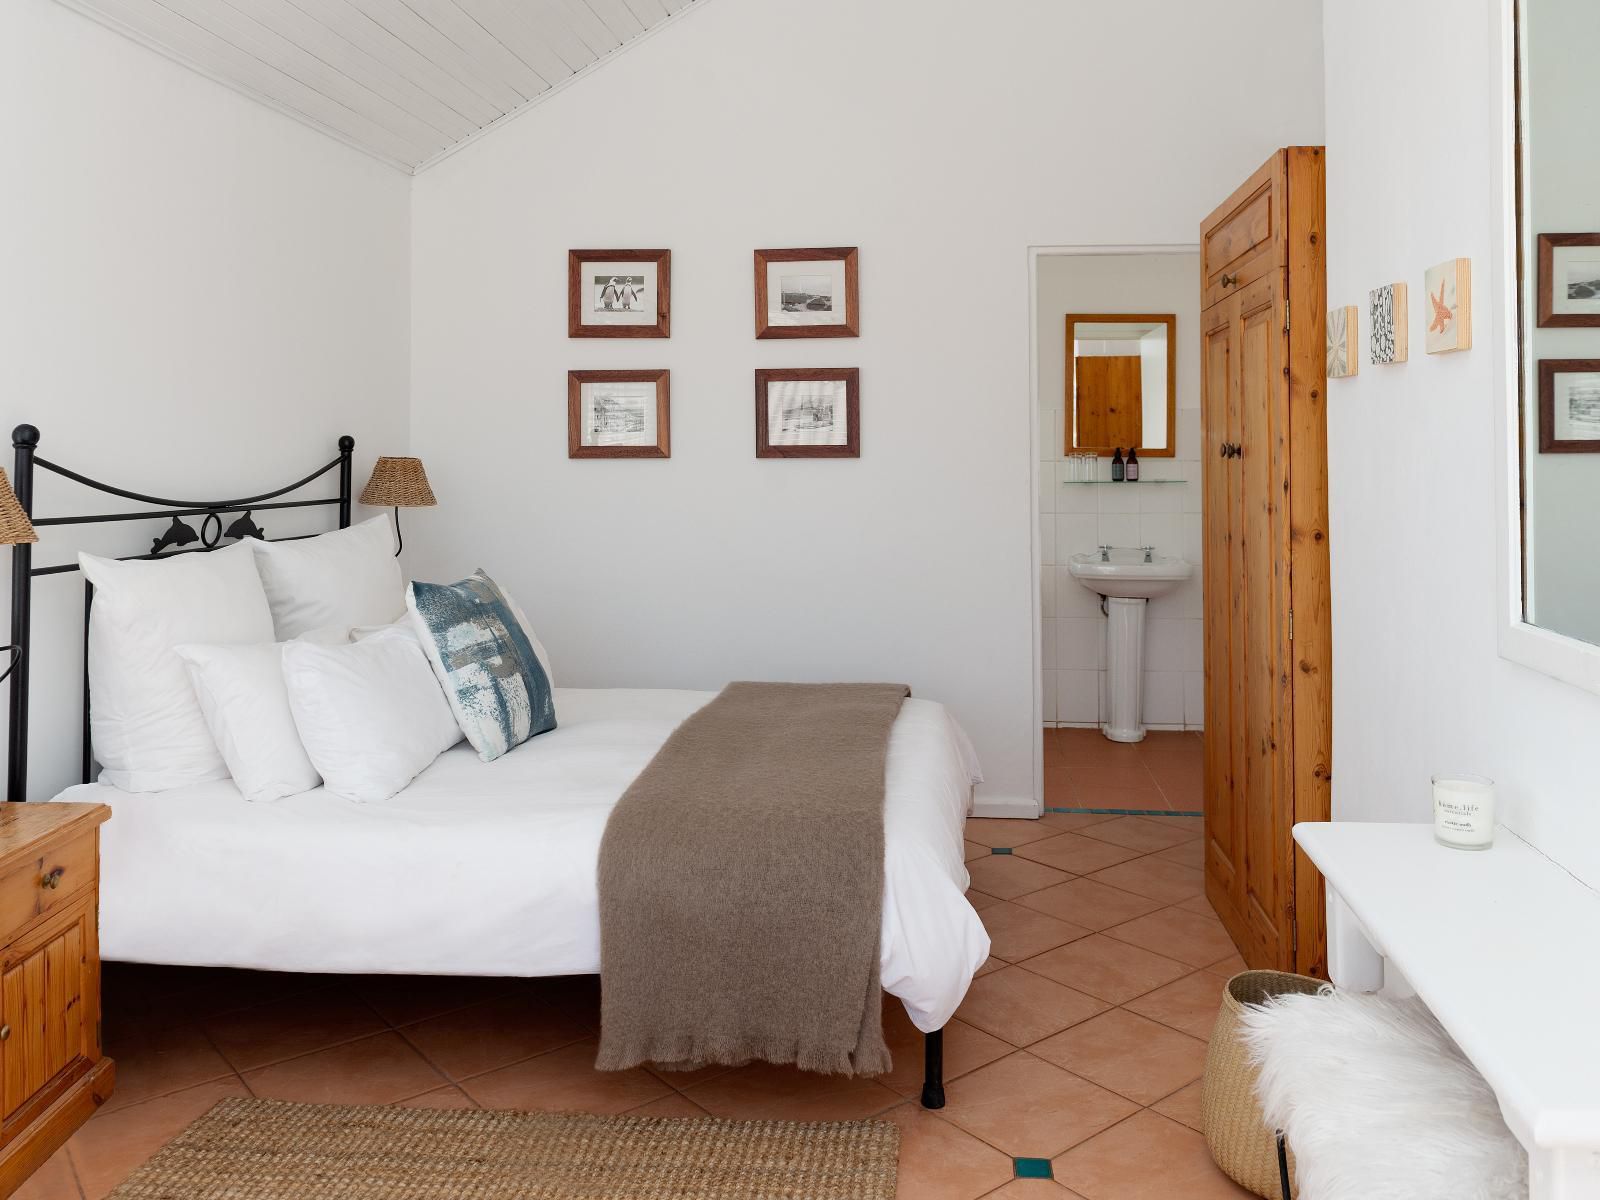 Boulders Beach Hotel Simons Town Cape Town Western Cape South Africa Bedroom